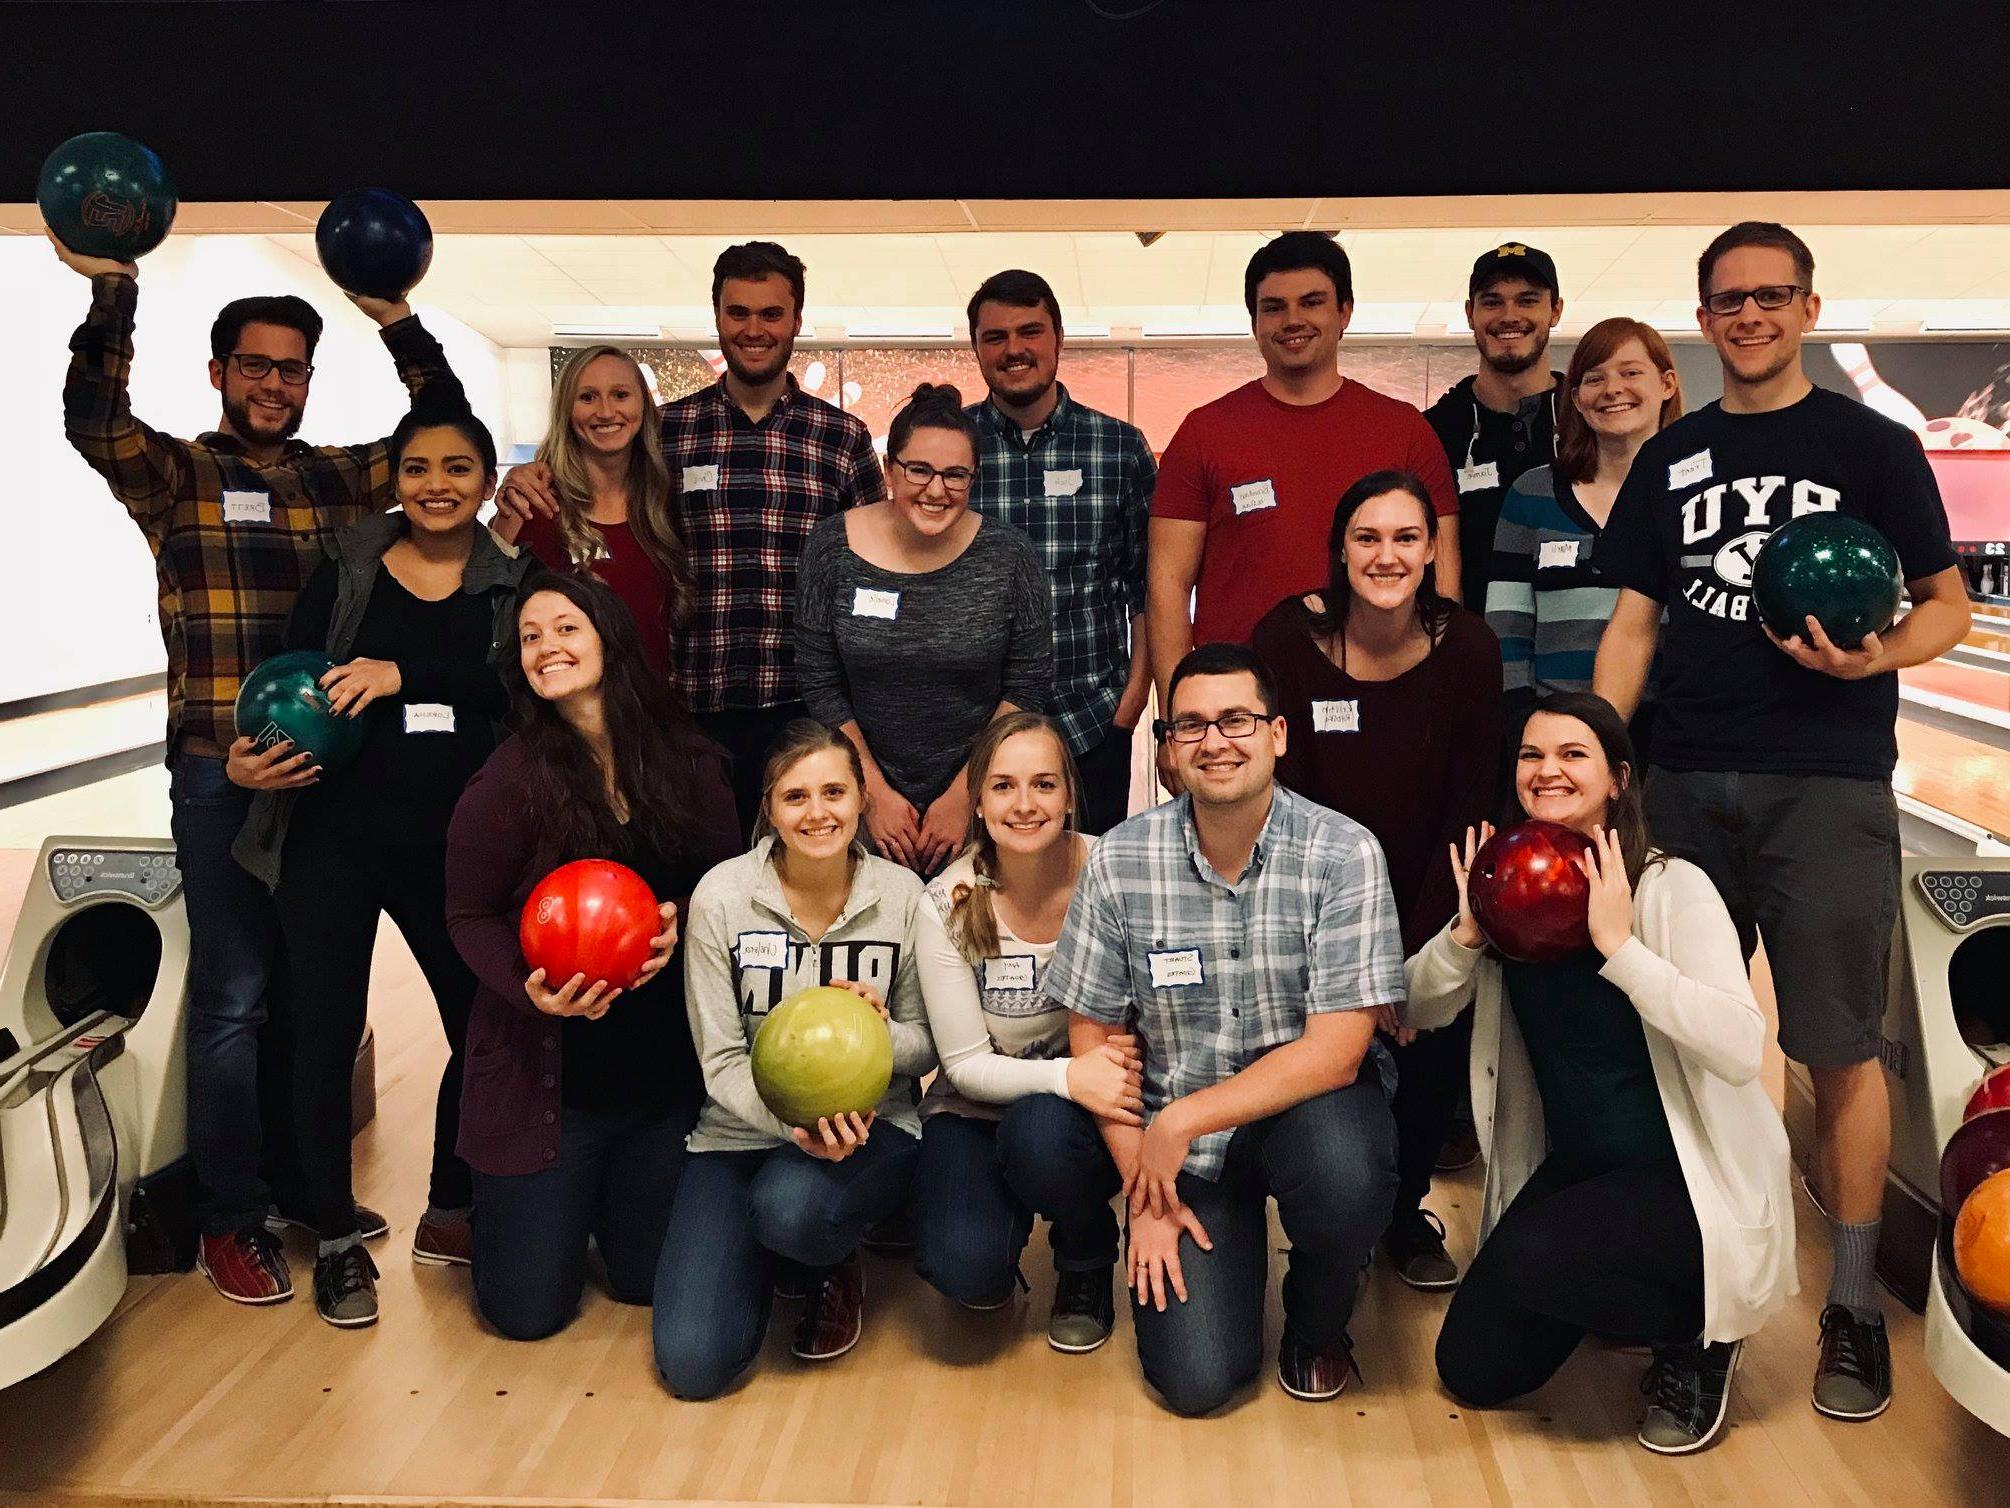 A group of OUWB students and their significant others pose with their bowling balls at the bowling alley.